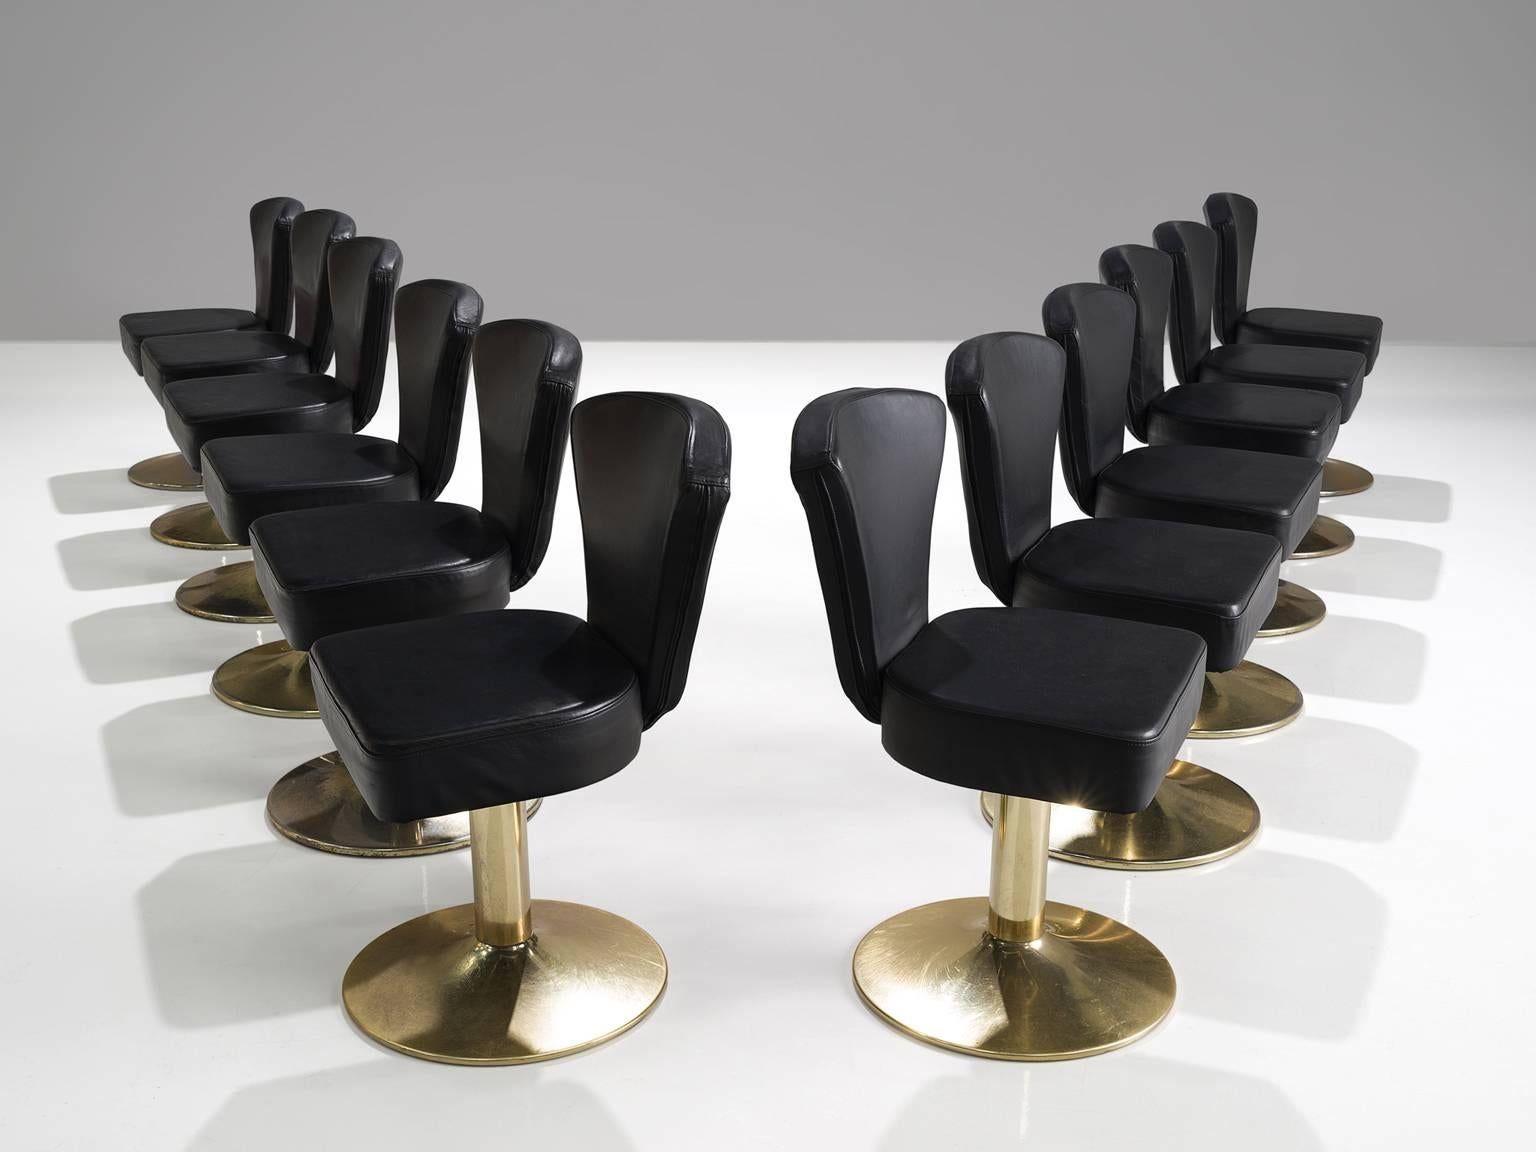 'Florence' bar stools, metal, black leatherette, Europe, design 1980s, later uphosltery.

This extraordinary set of classic Casino barstools is upholstered with a black faux leather on a gold colored metal base. The stools serve as a playful